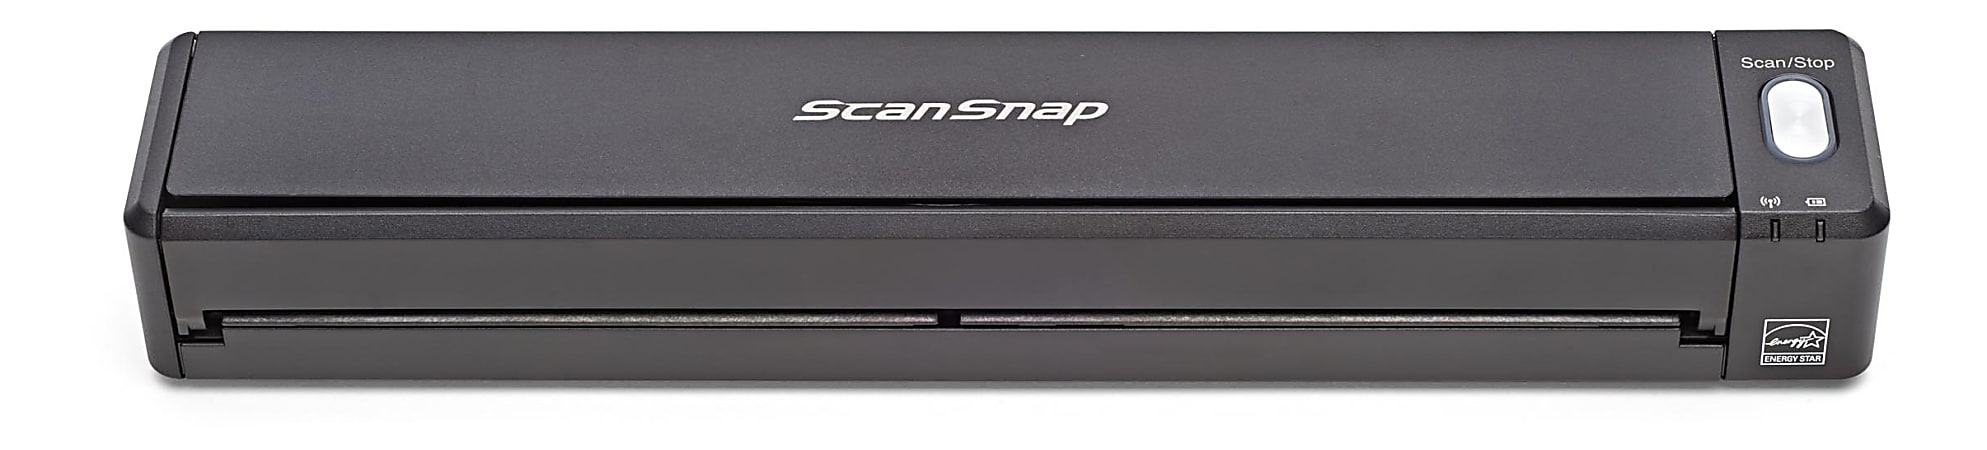 Fujitsu ScanSnap iX100 Wireless Color Sheetfed Scanner